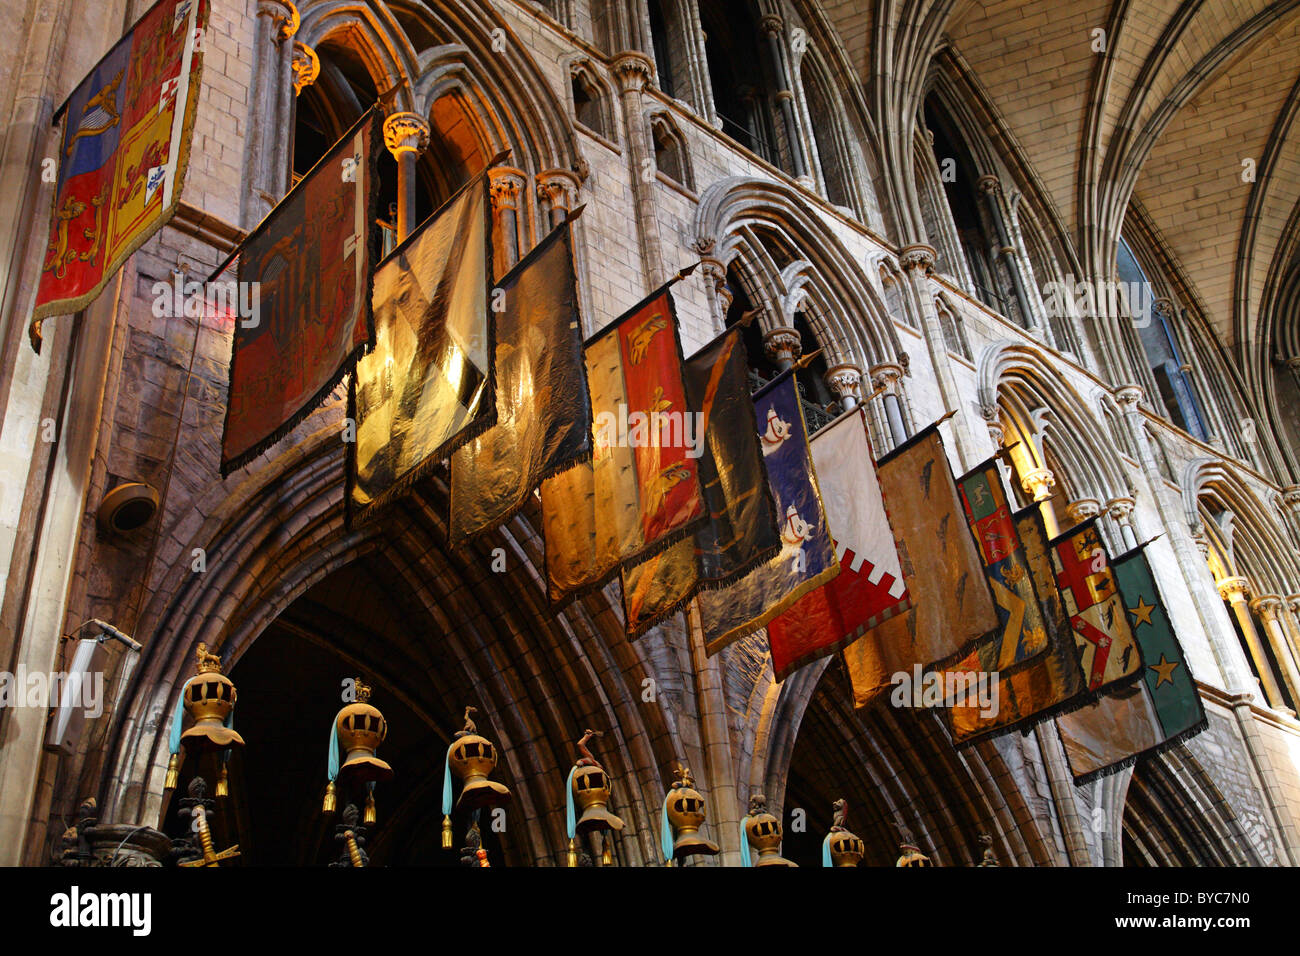 Flags, St. Patrick's Cathedral Dublin Ireland Stock Photo